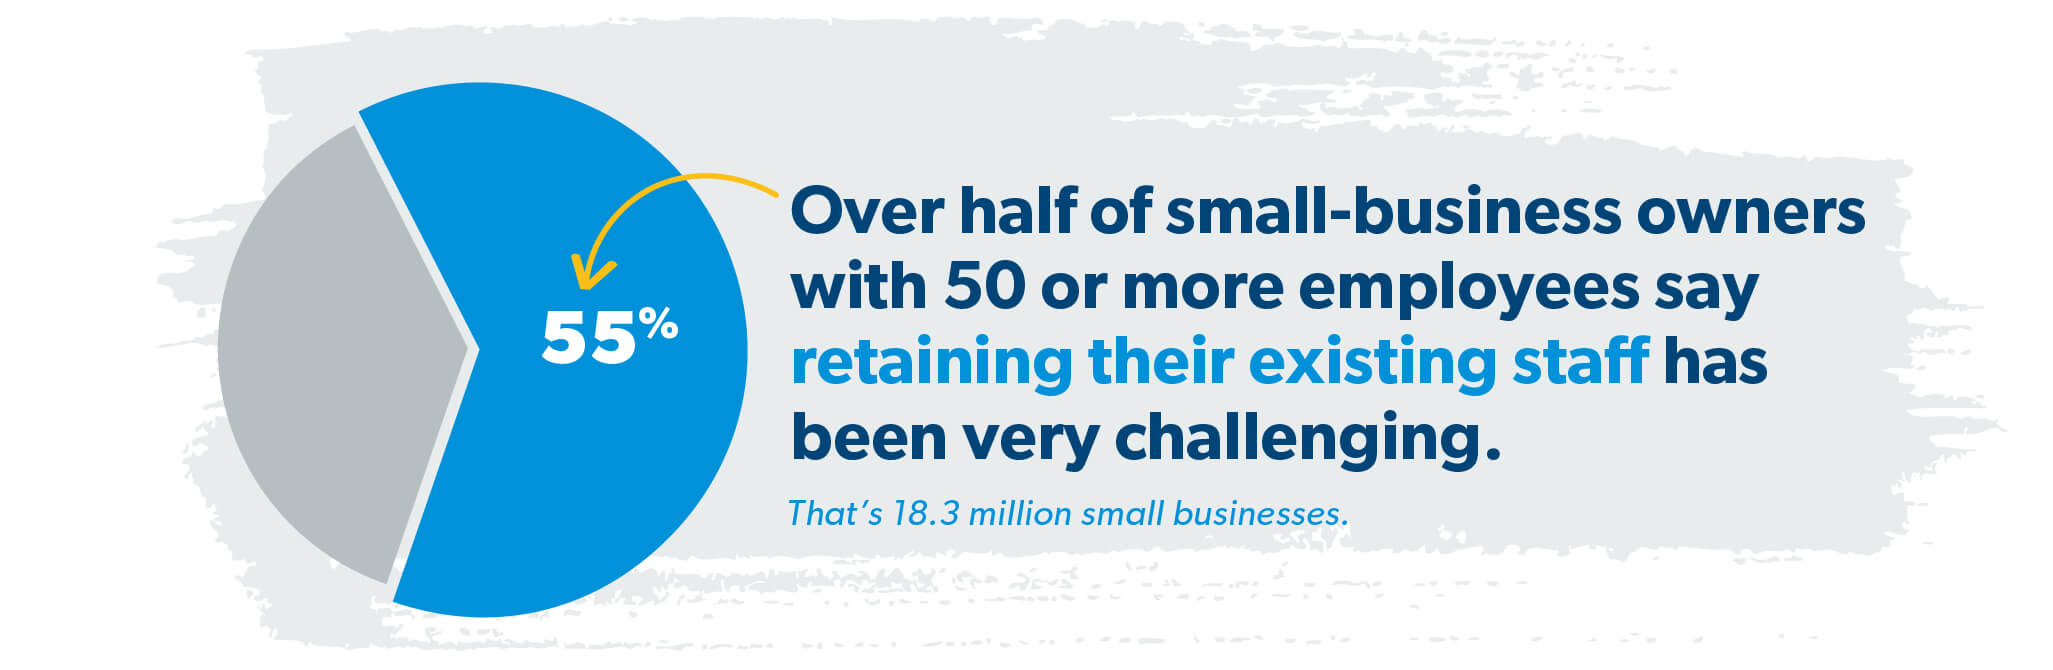 over half of small-business owners with 50 or more employees say retaining their existing staff has been very challenging